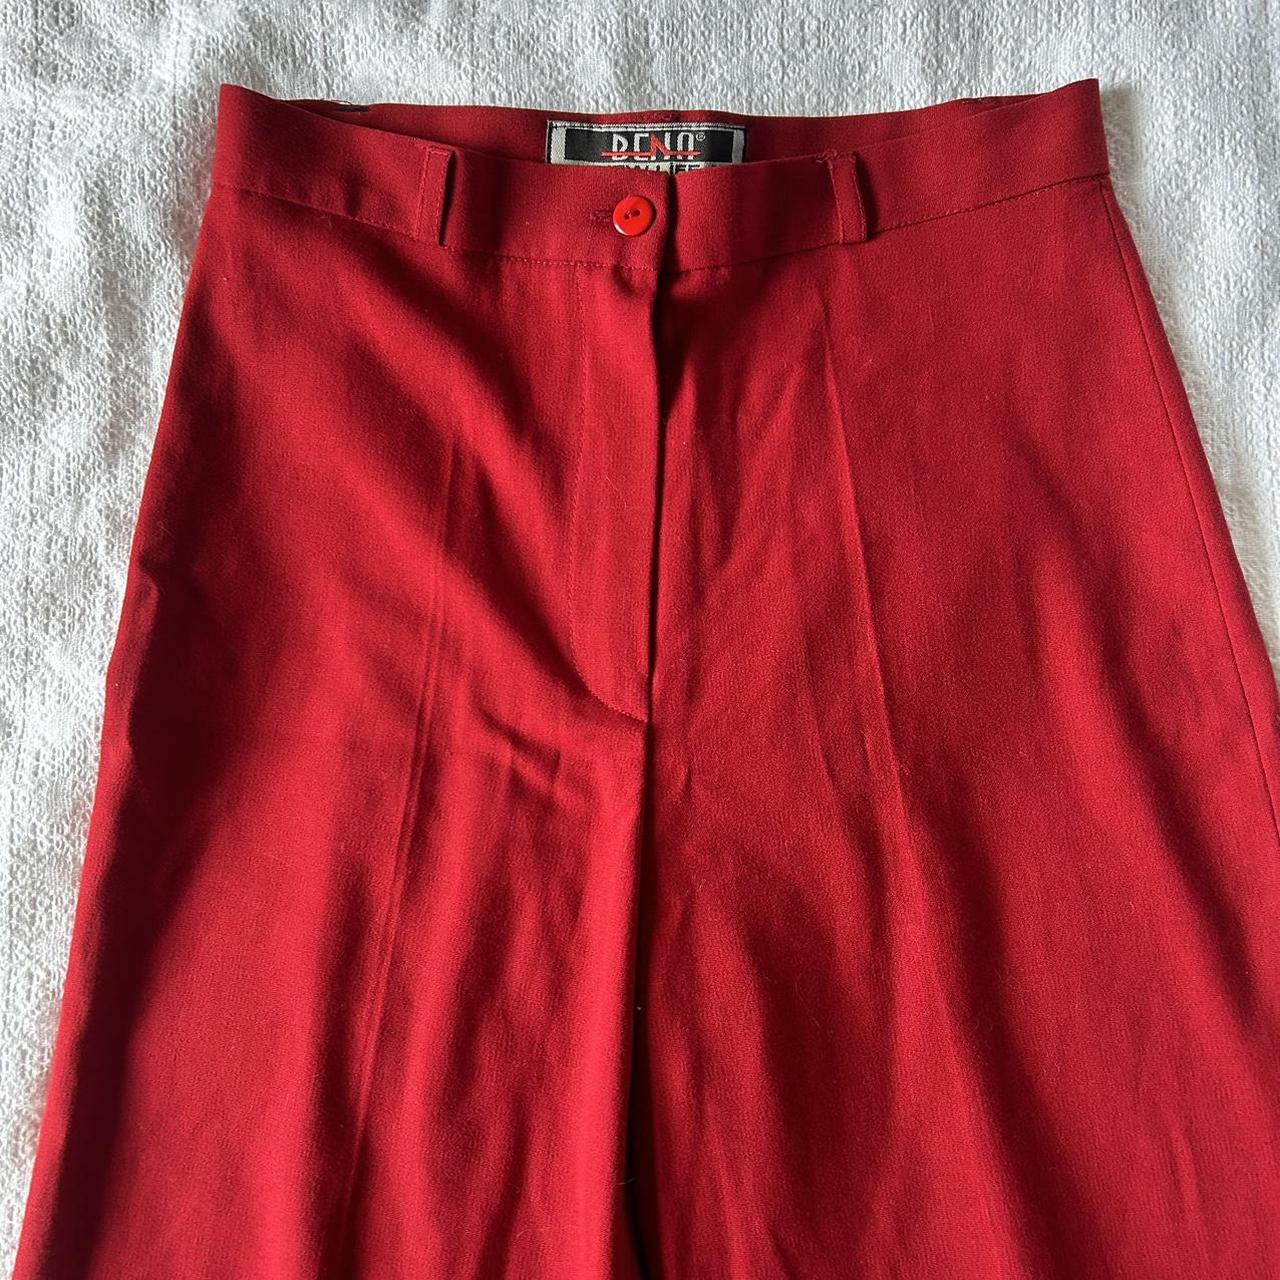 Vintage red flared high waisted pants. Very... - Depop